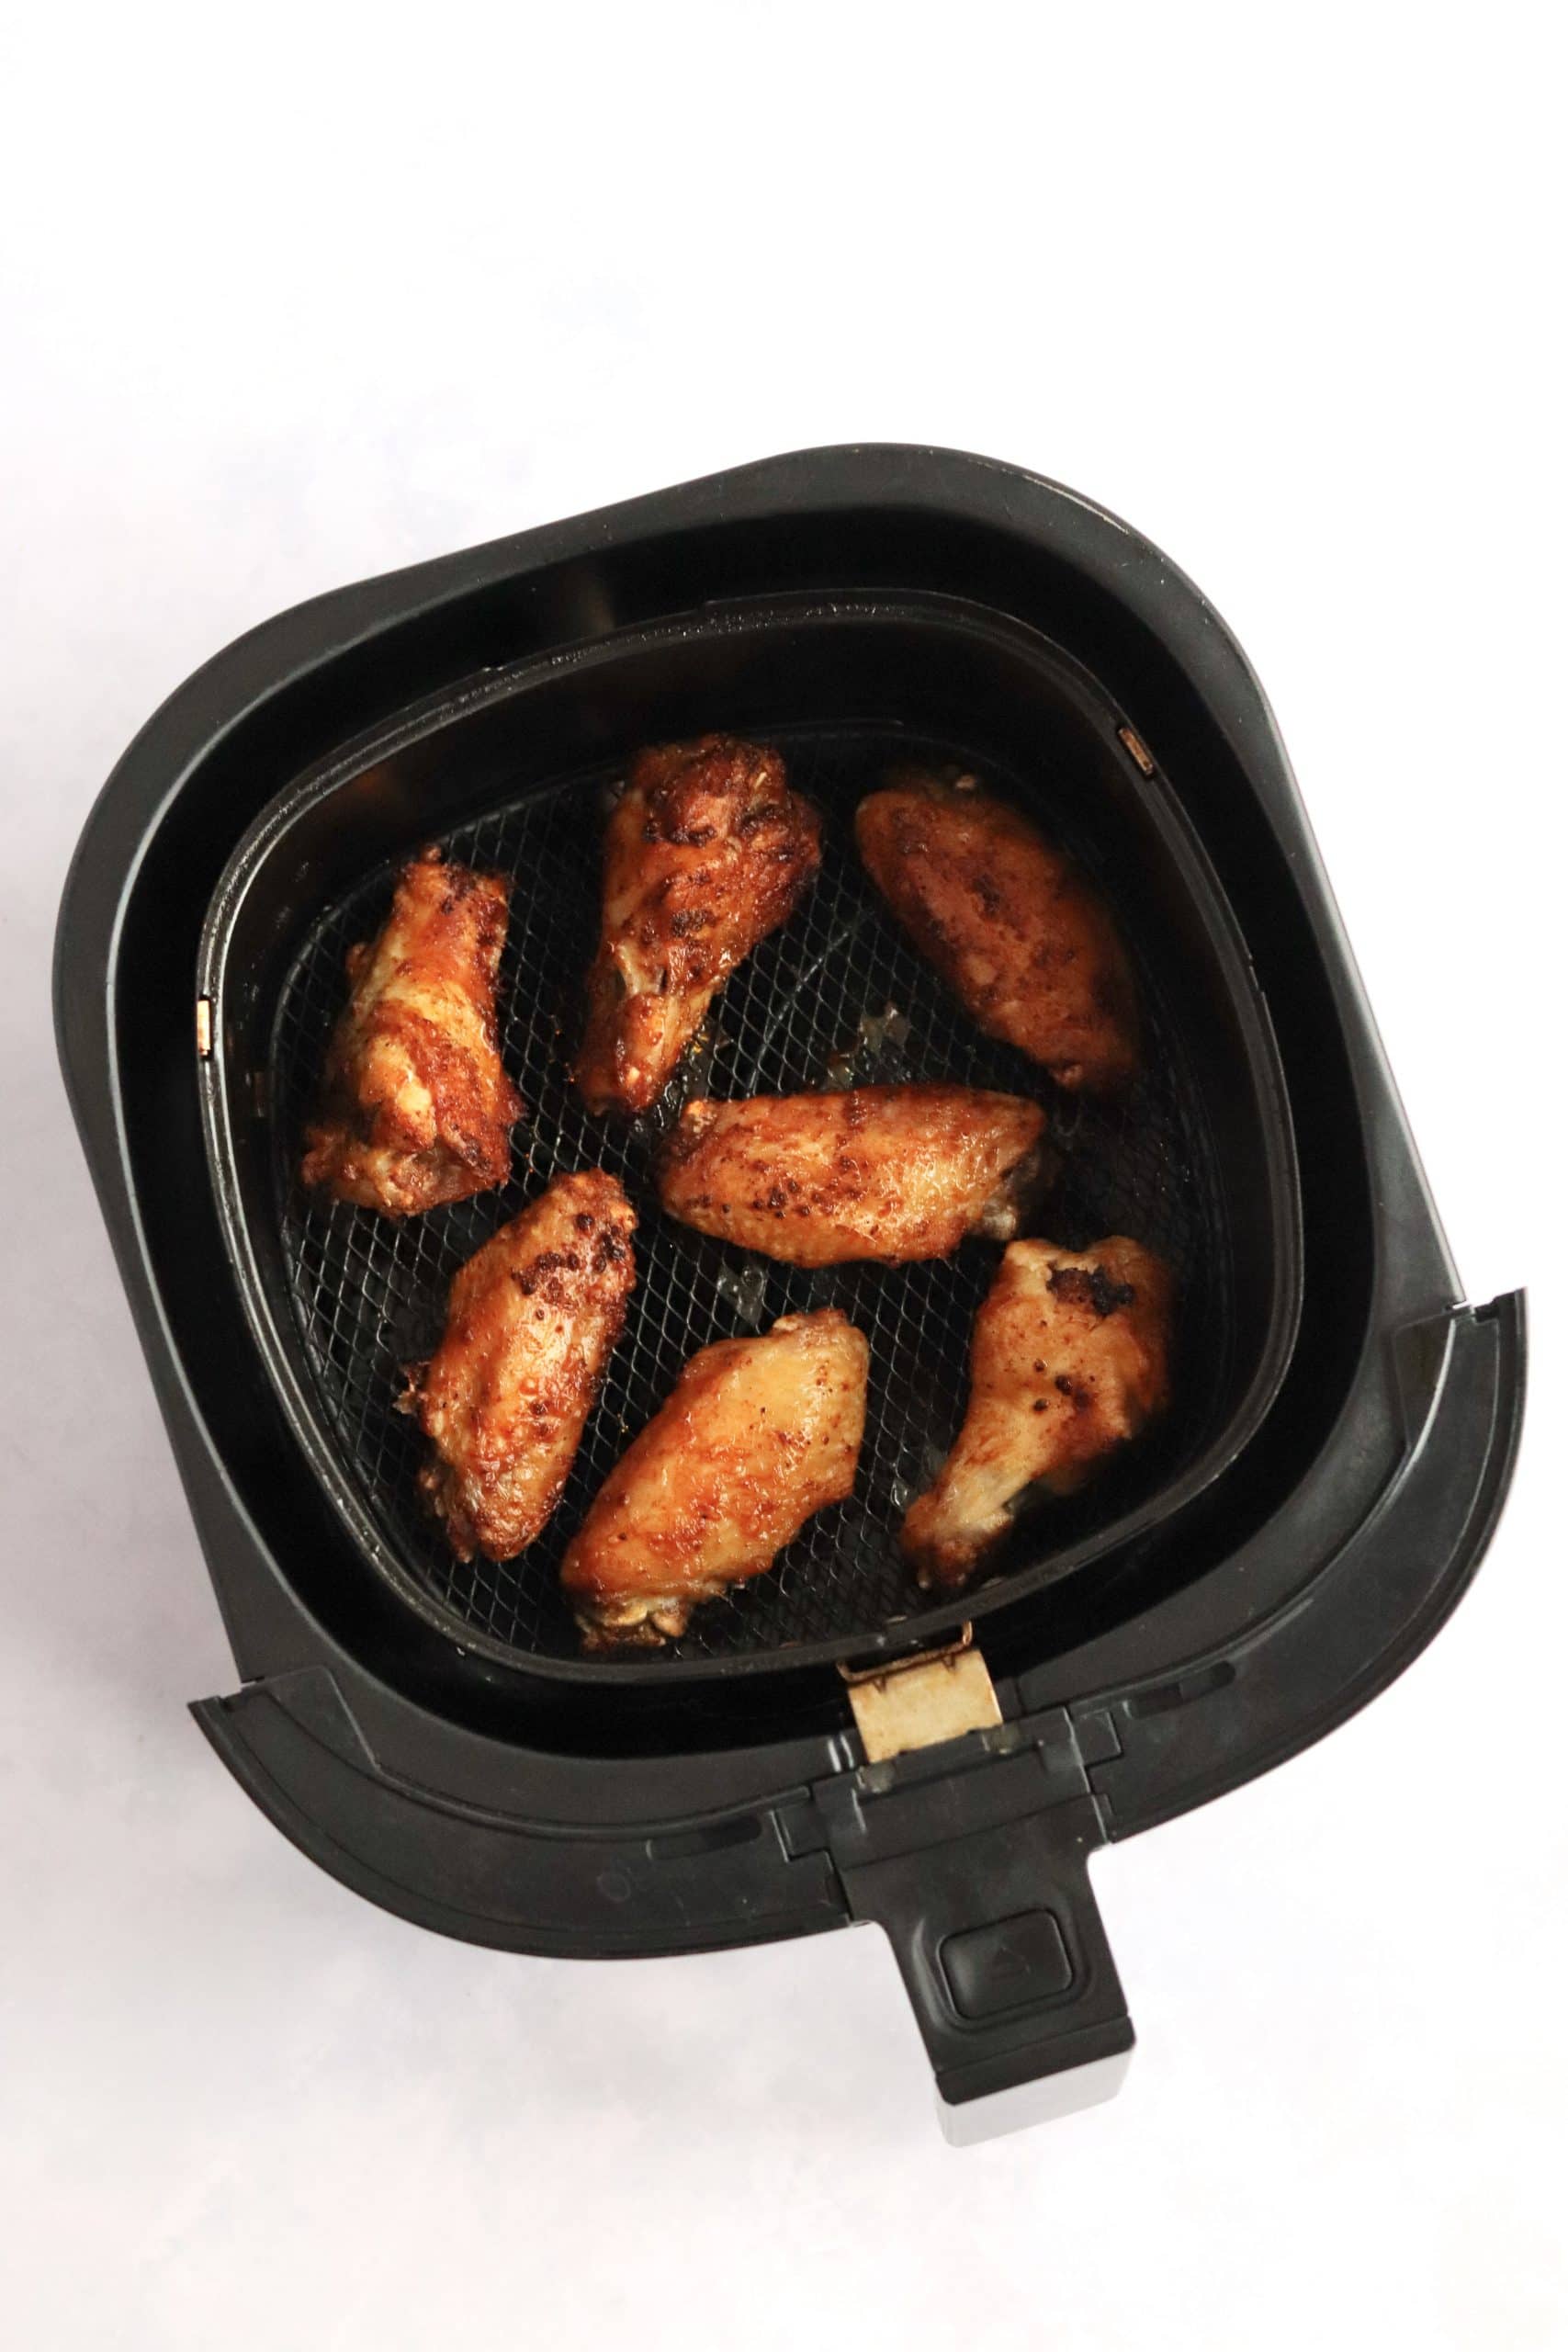 cooked chicken wings in air fryer.